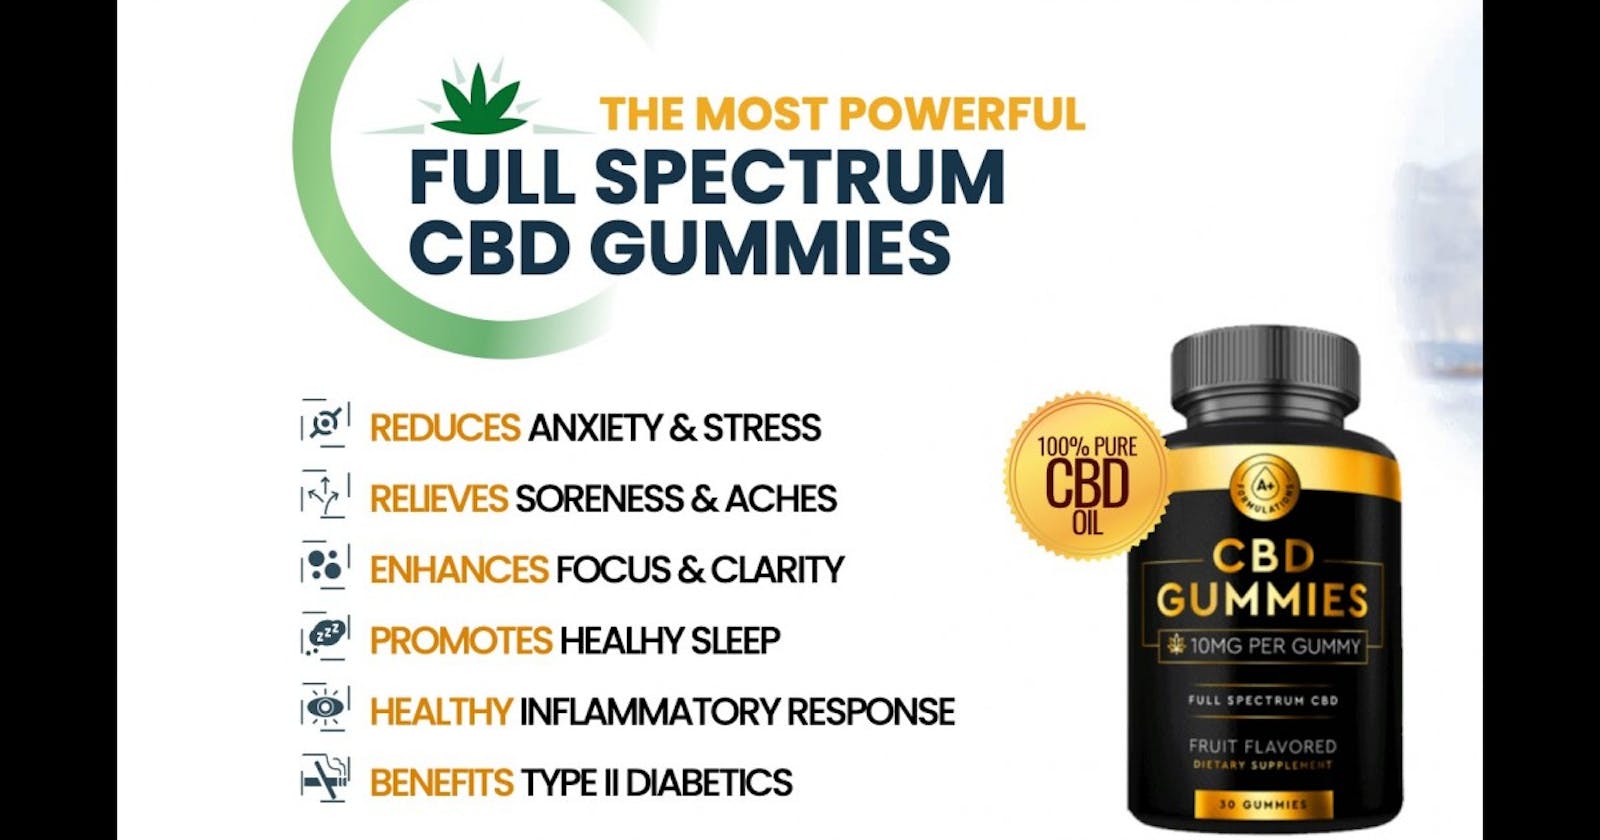 A + Formulation Cbd Gummies Reviews Is It Really Legit? How Does It Work?